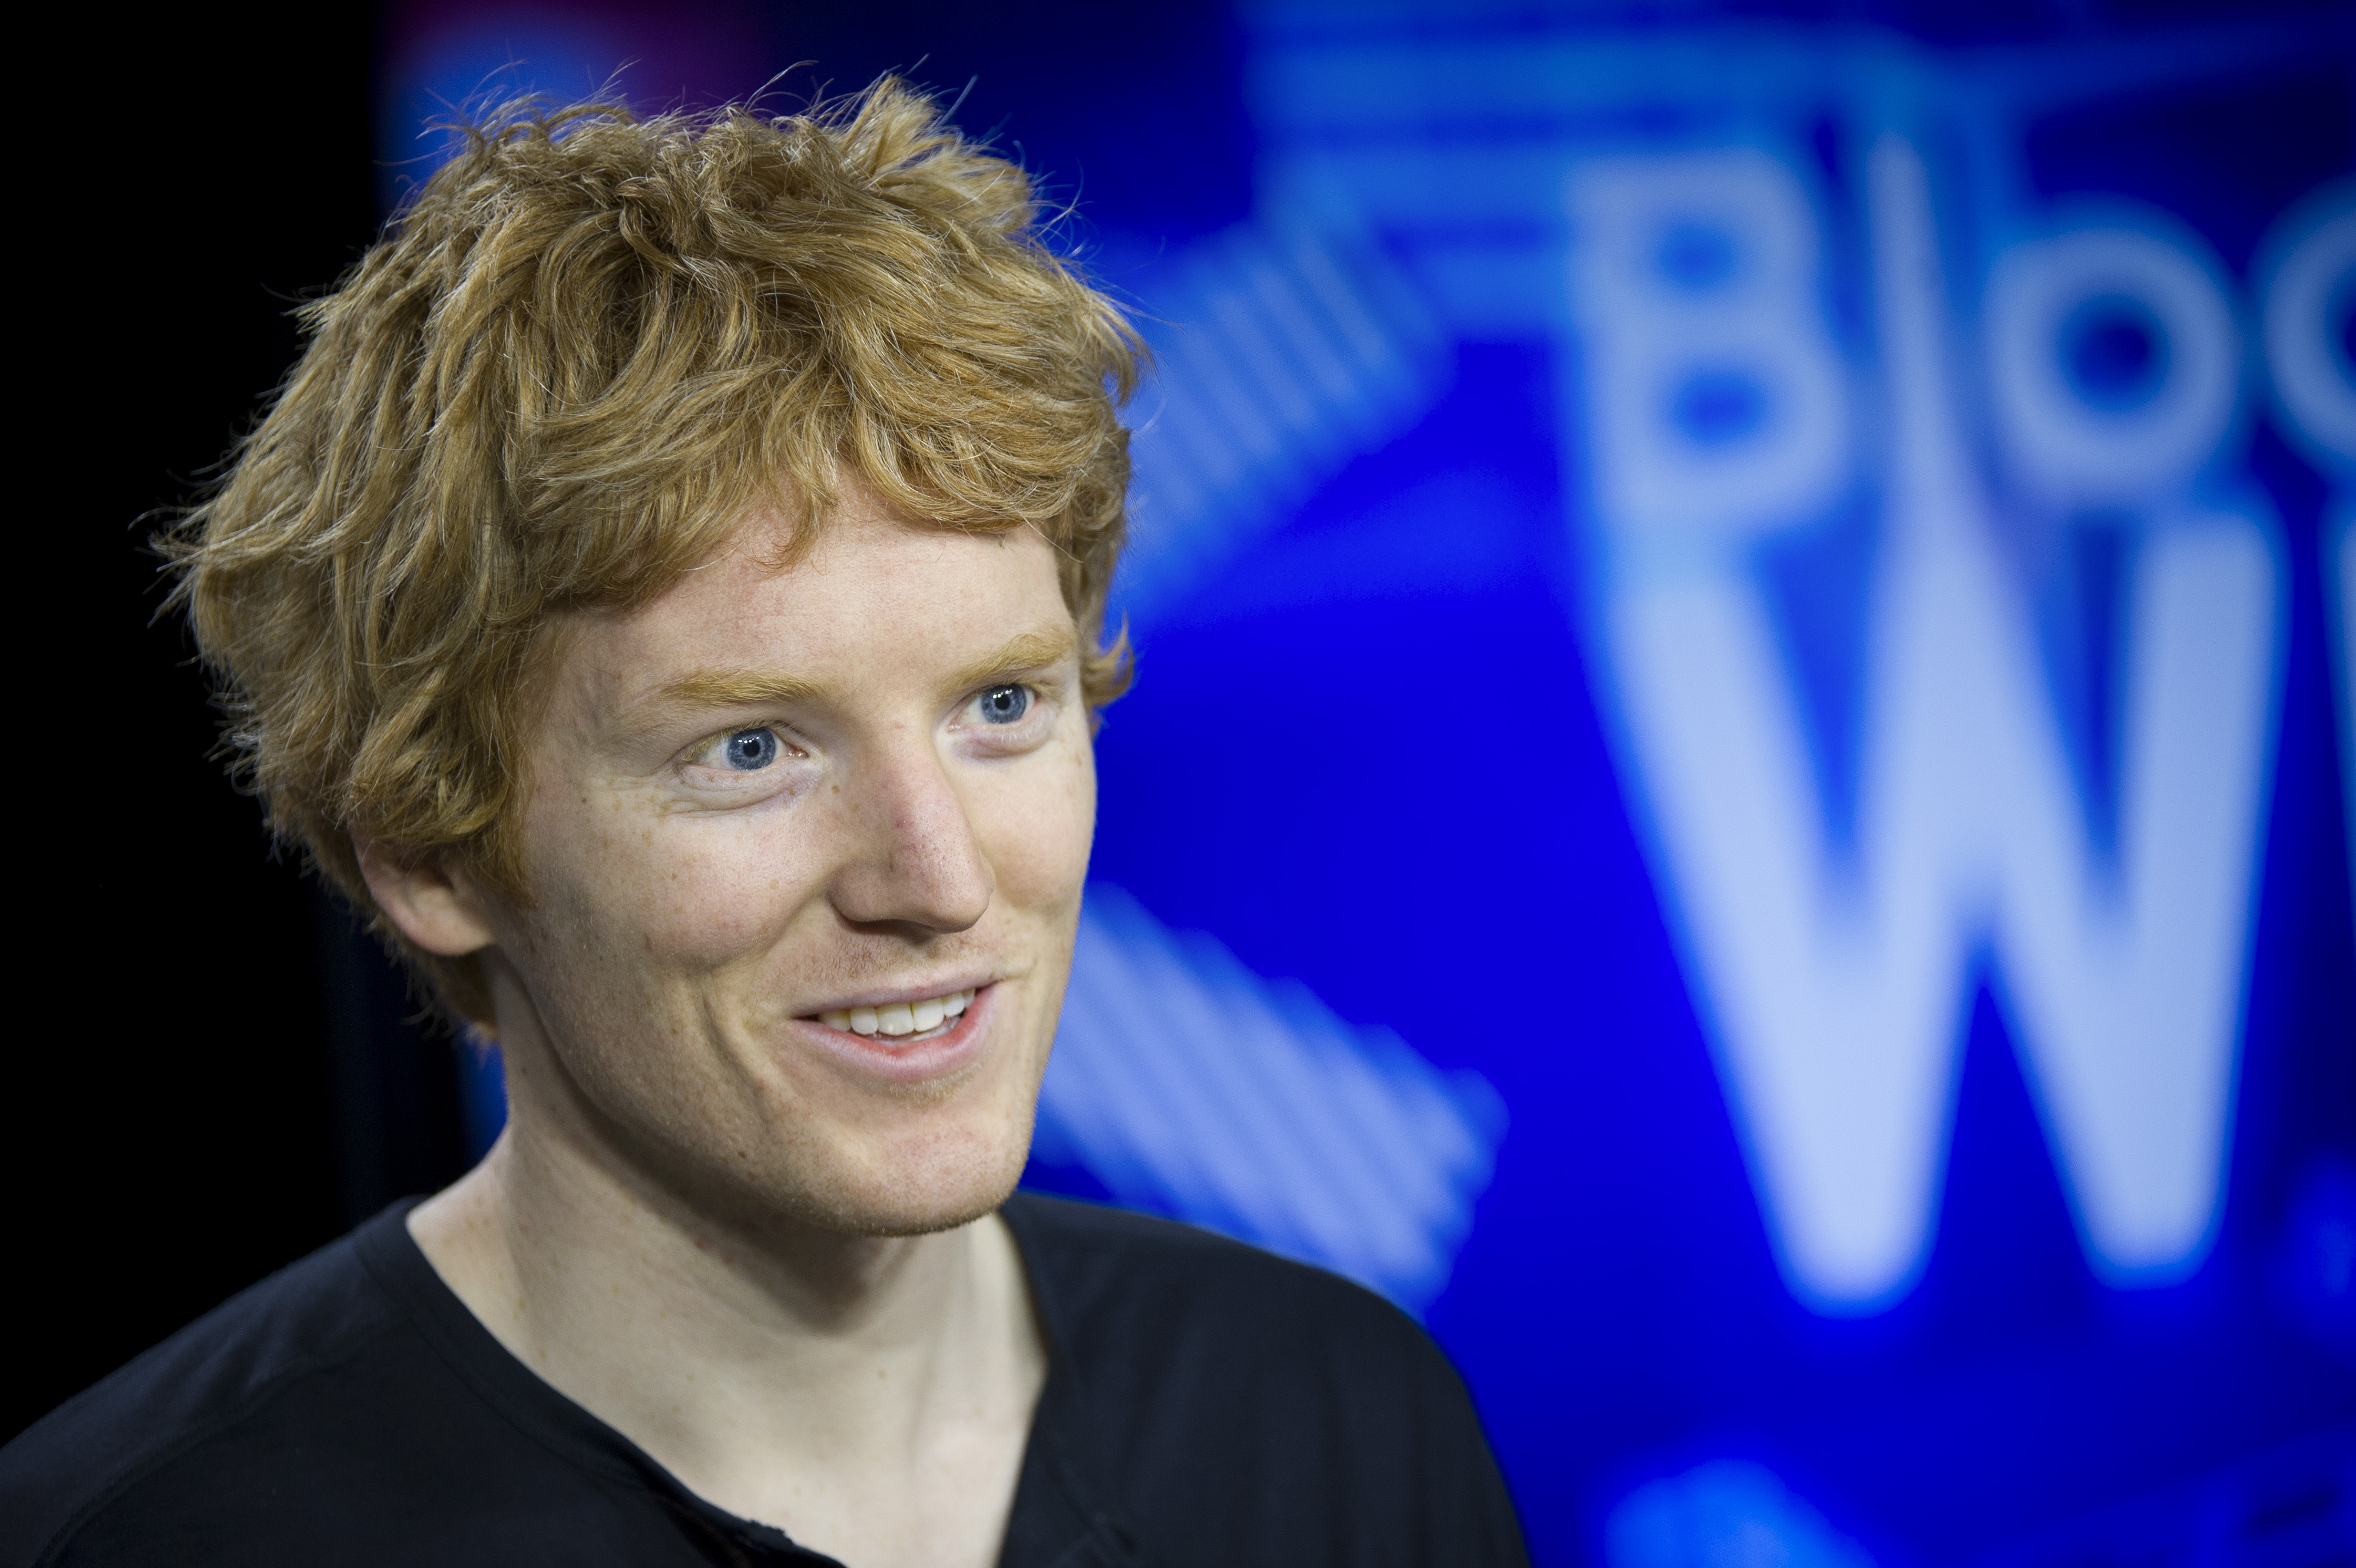 Patrick Collison, co-founder and chief executive officer of Stripe Inc., speaks during a Bloomberg West Television interview in San Francisco, California, on Tuesday, March 18, 2014. (David Paul Morris—Bloomberg/Getty Images)